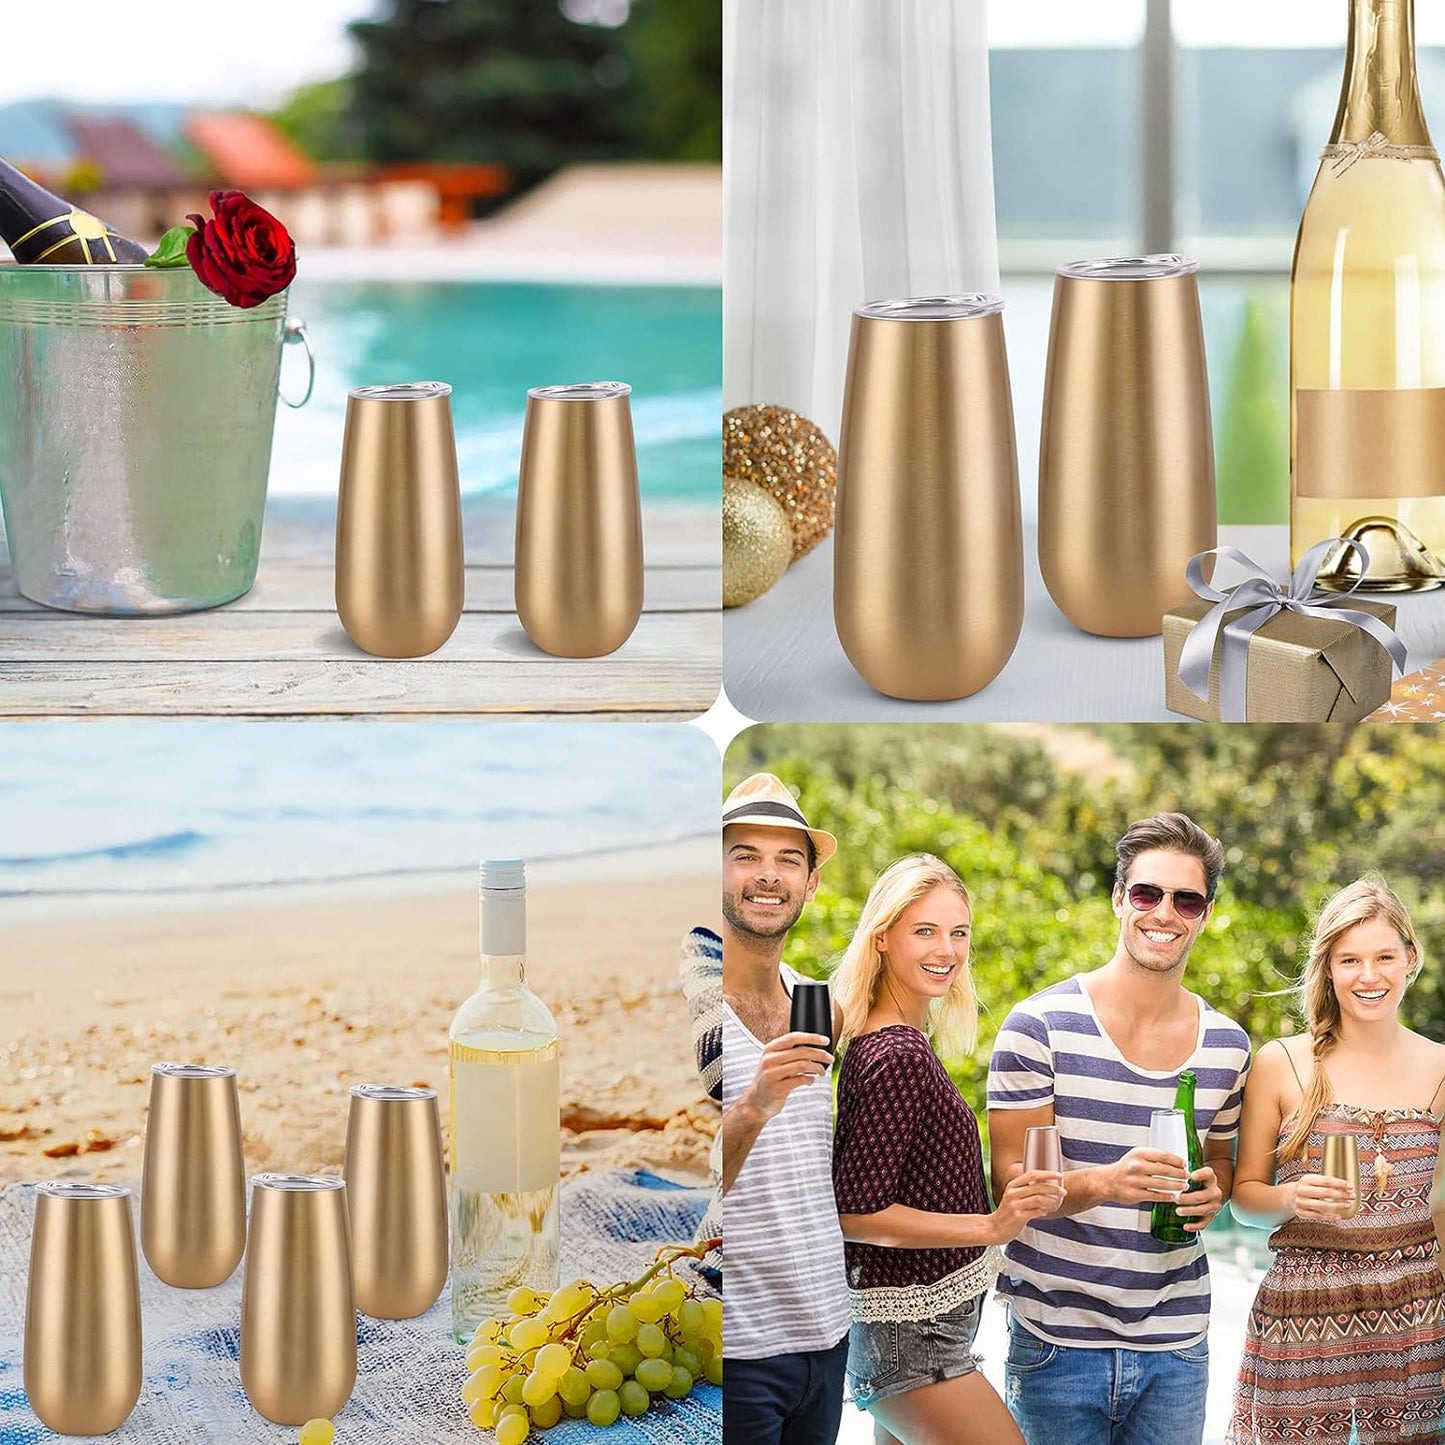 8 Pack Insulated Champagne Tumblers, Stemless Champagne Tumbler 6 Oz, Champagne Flutes Wine Tumbler, Unbreakable Cocktail Cups with Lid, Gift for Family Friends Christmas Birthday Wedding (Gold)